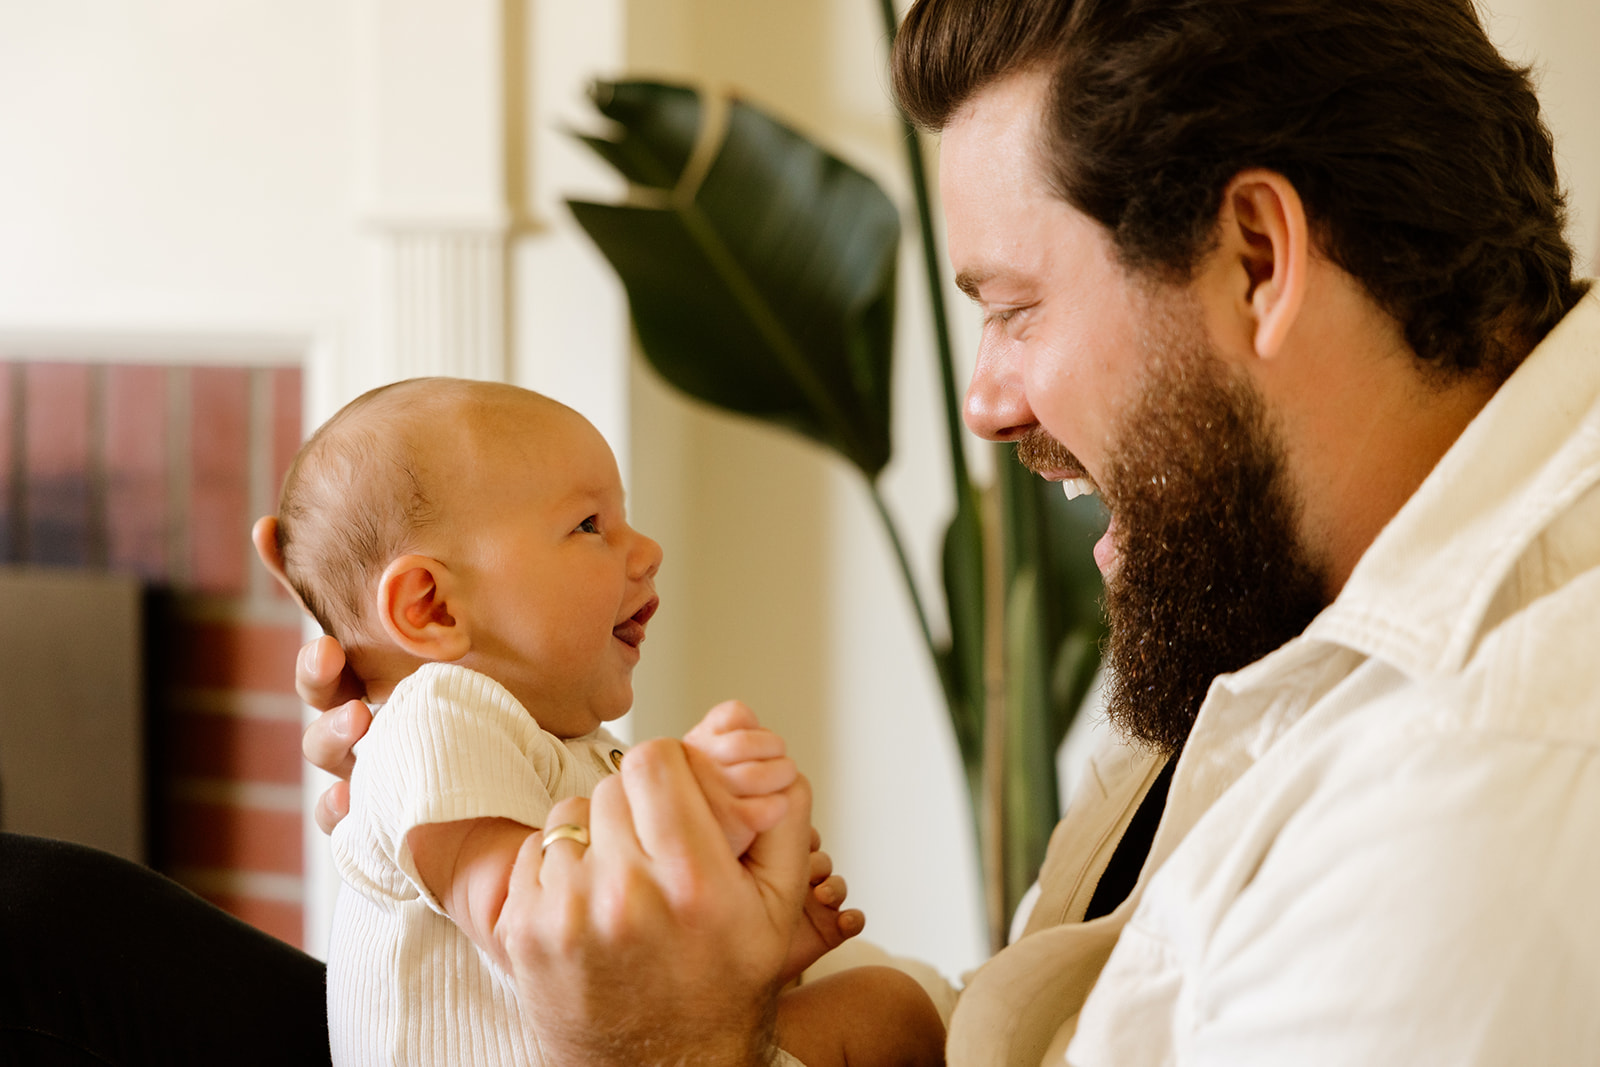 Close-up photo of a father holding his newborn baby and making the infant laugh.